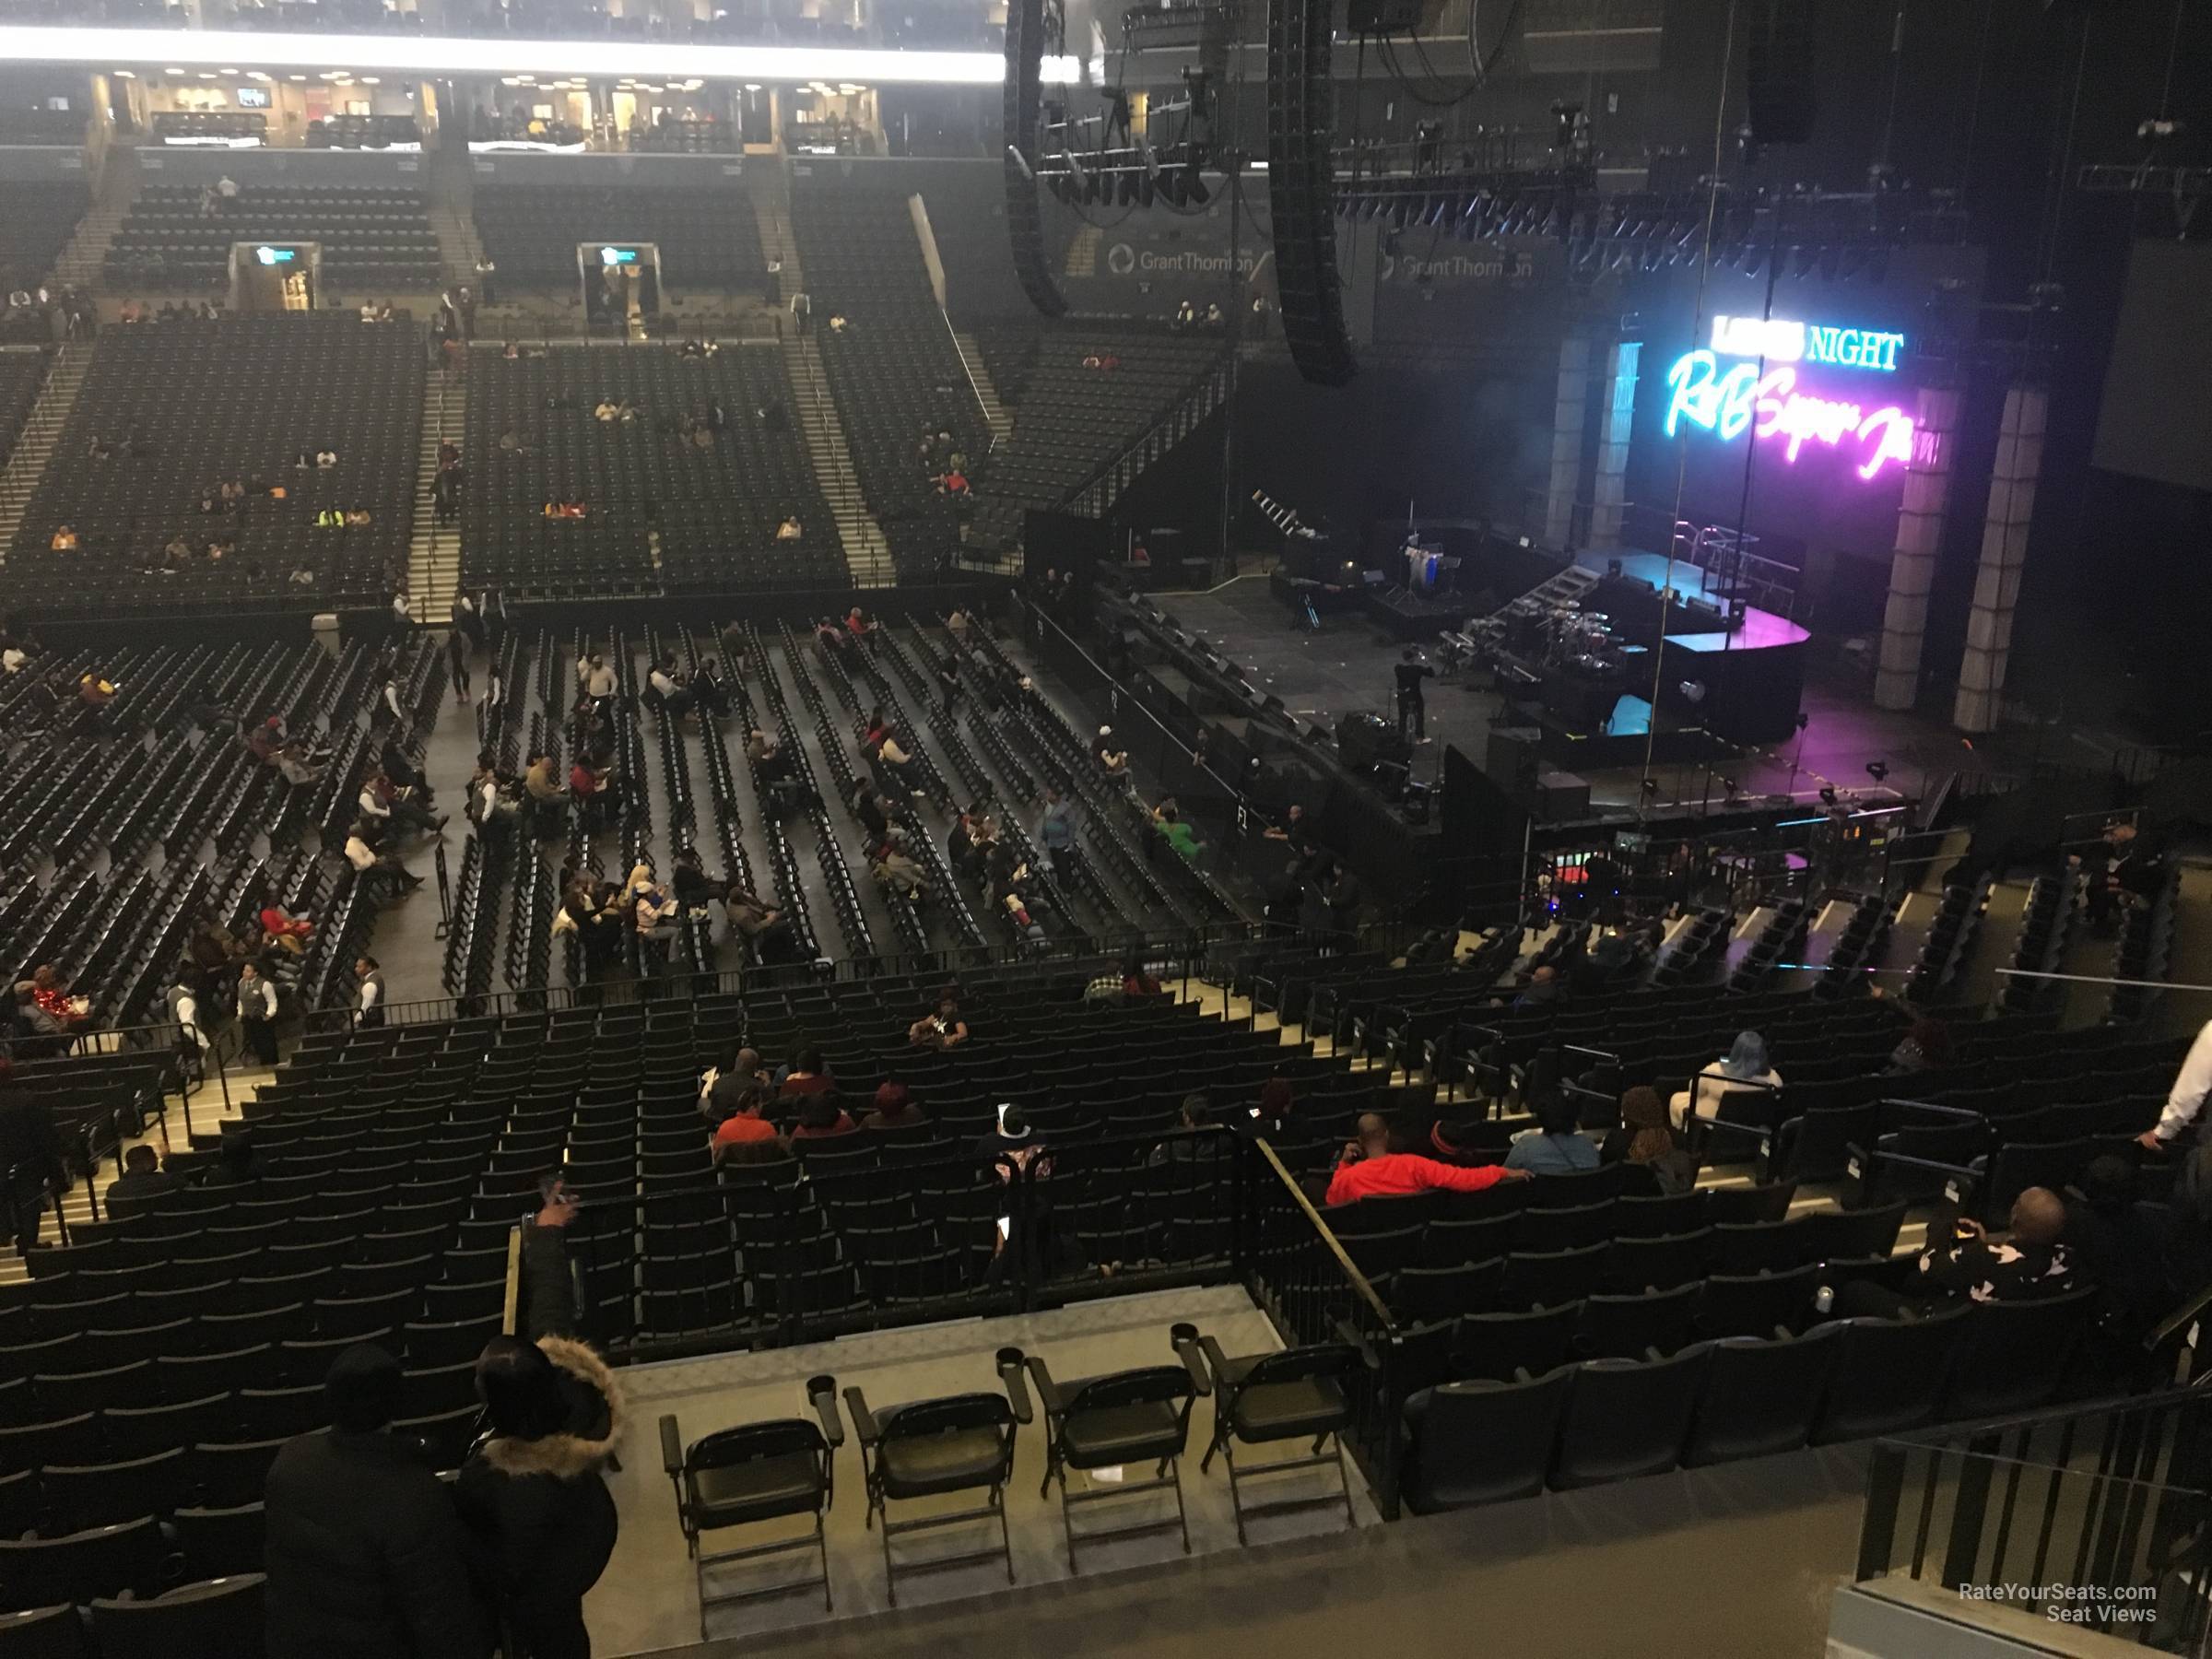 Section 107 at Barclays Center for Concerts